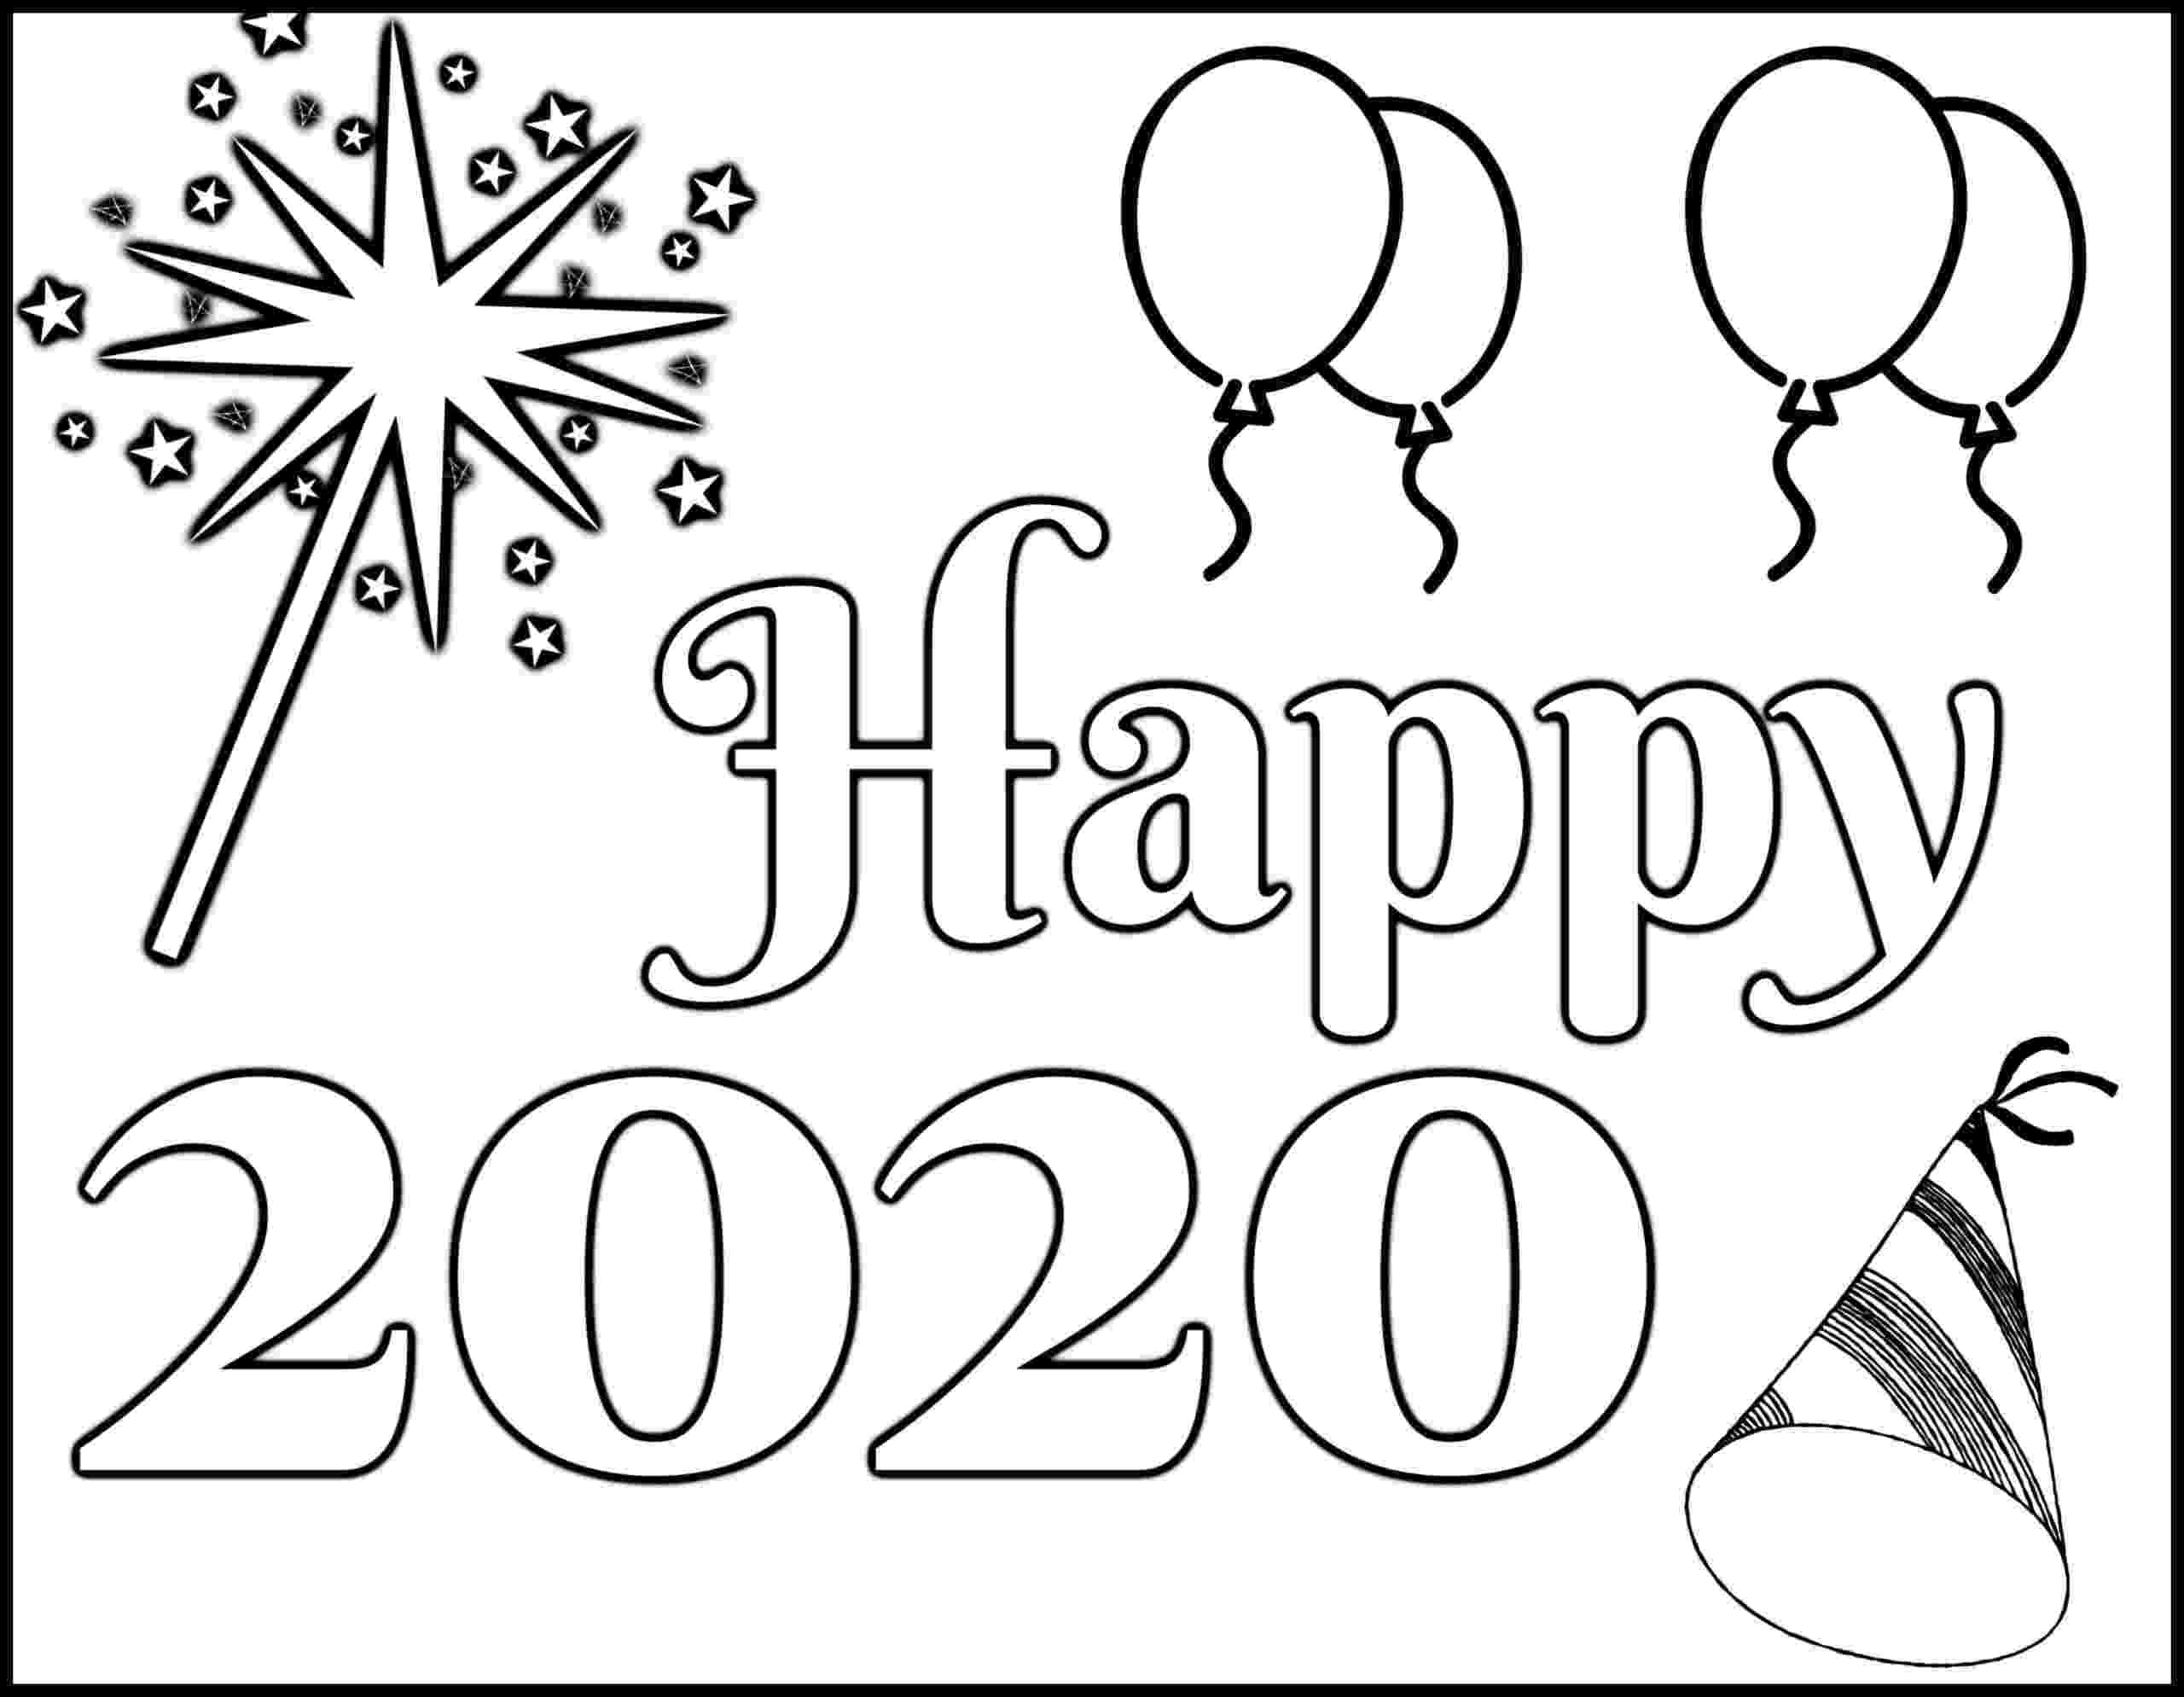 new years coloring page new year39s coloring page 2020 quotlet your light shinequot free page years coloring new 